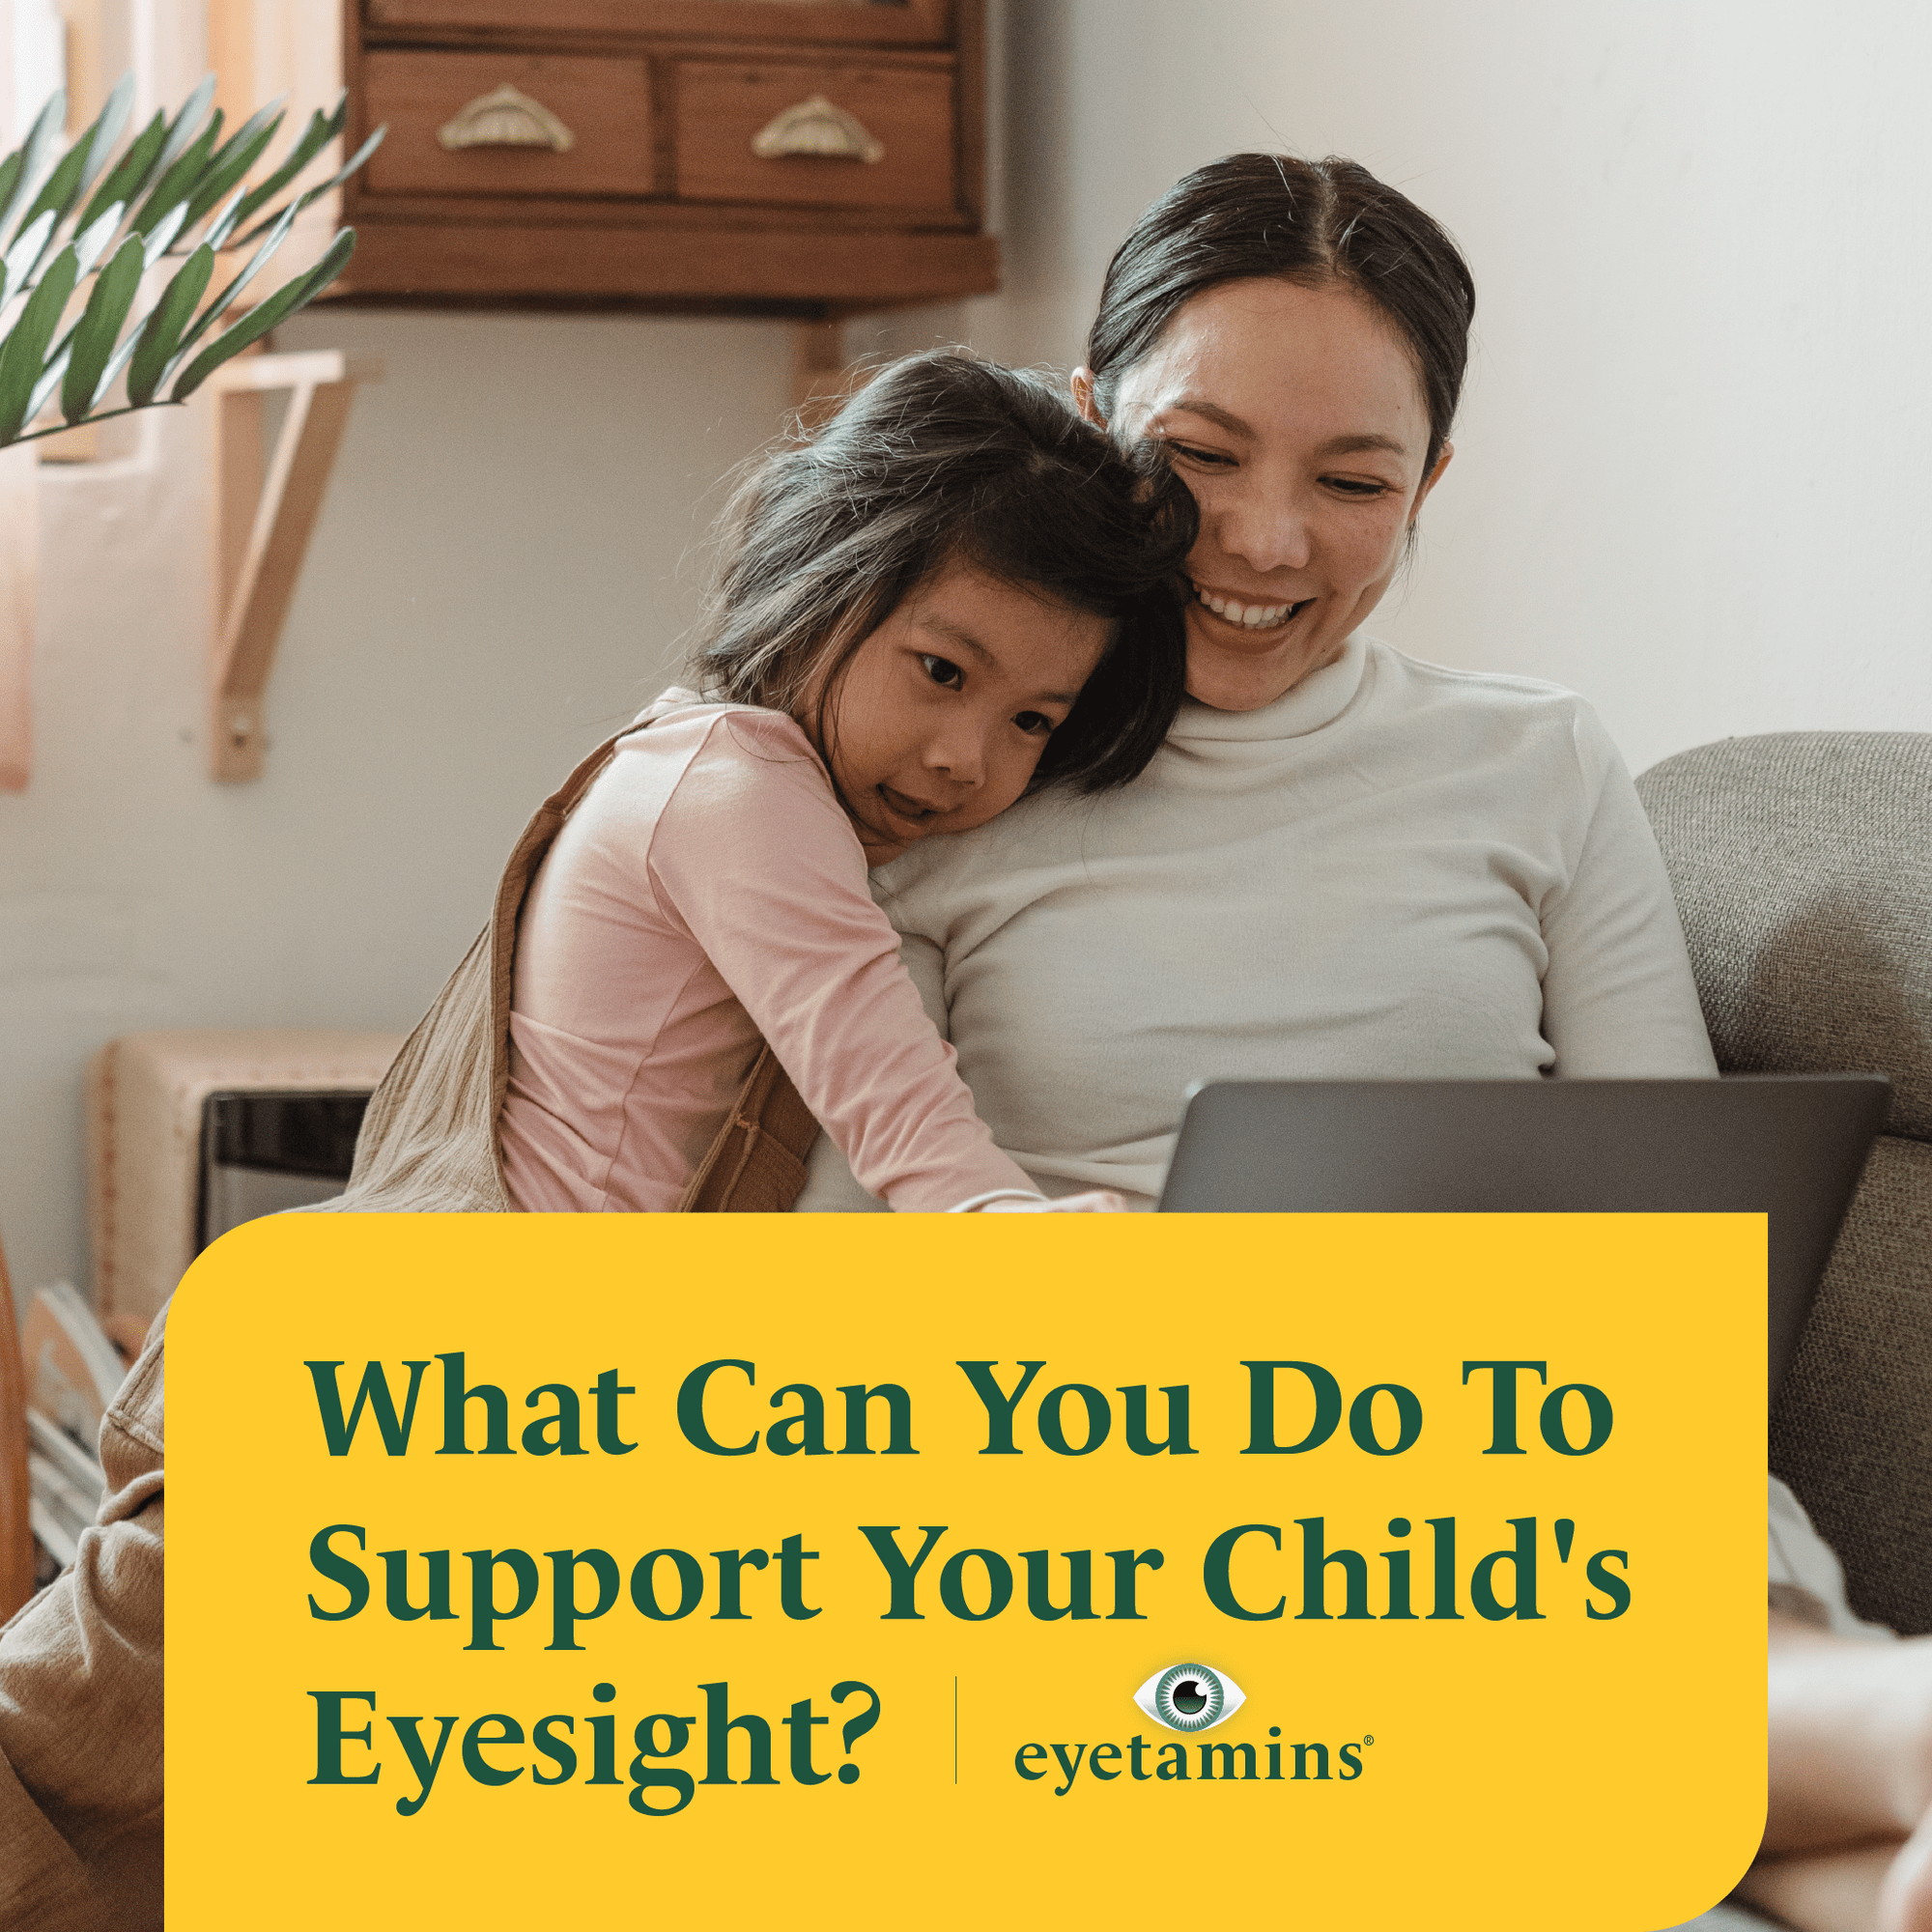 What Can You Do To Support Your Child's Eyesight?